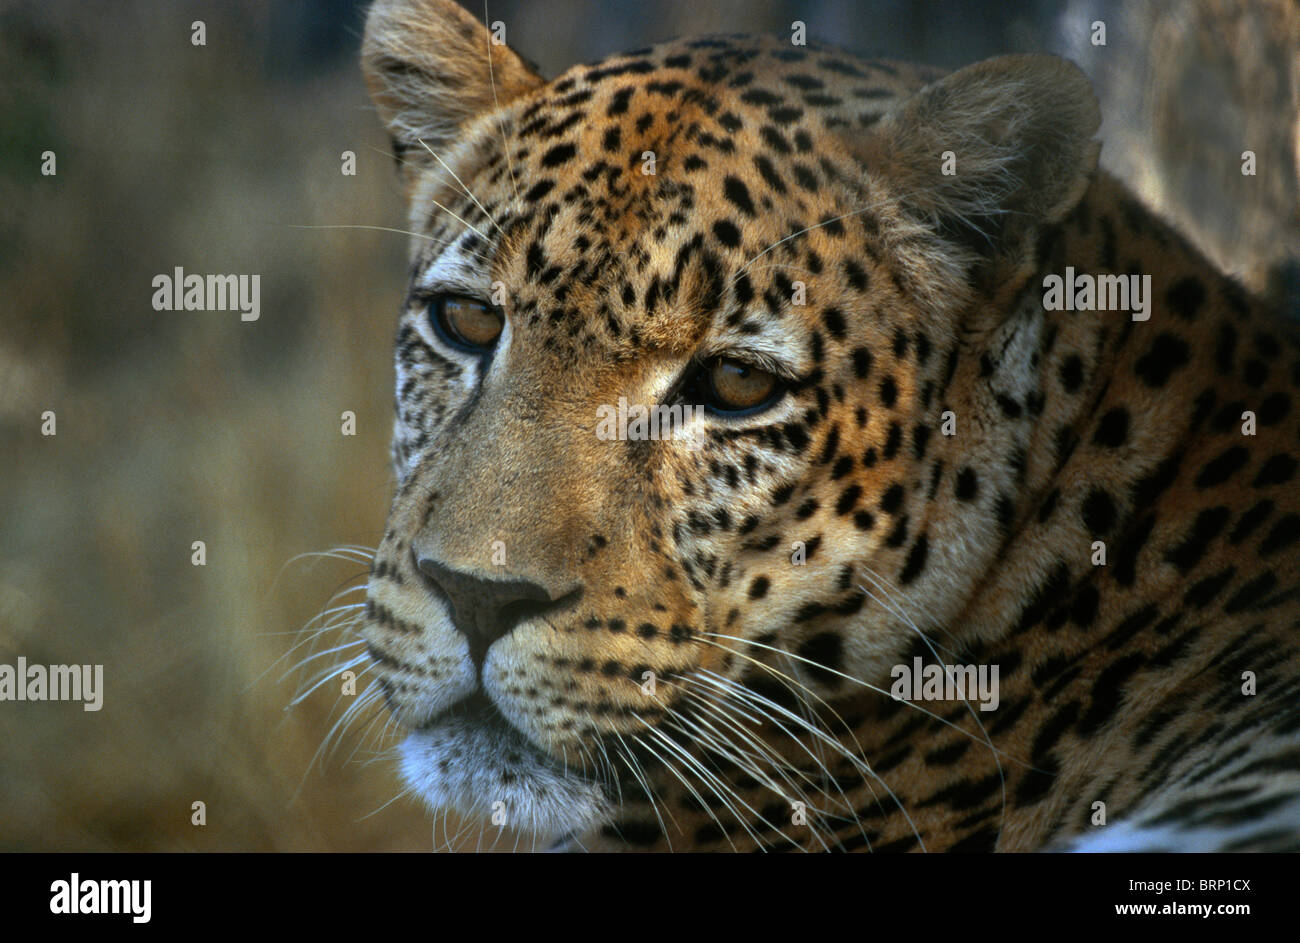 A tightly framed portrait of a leopard Stock Photo